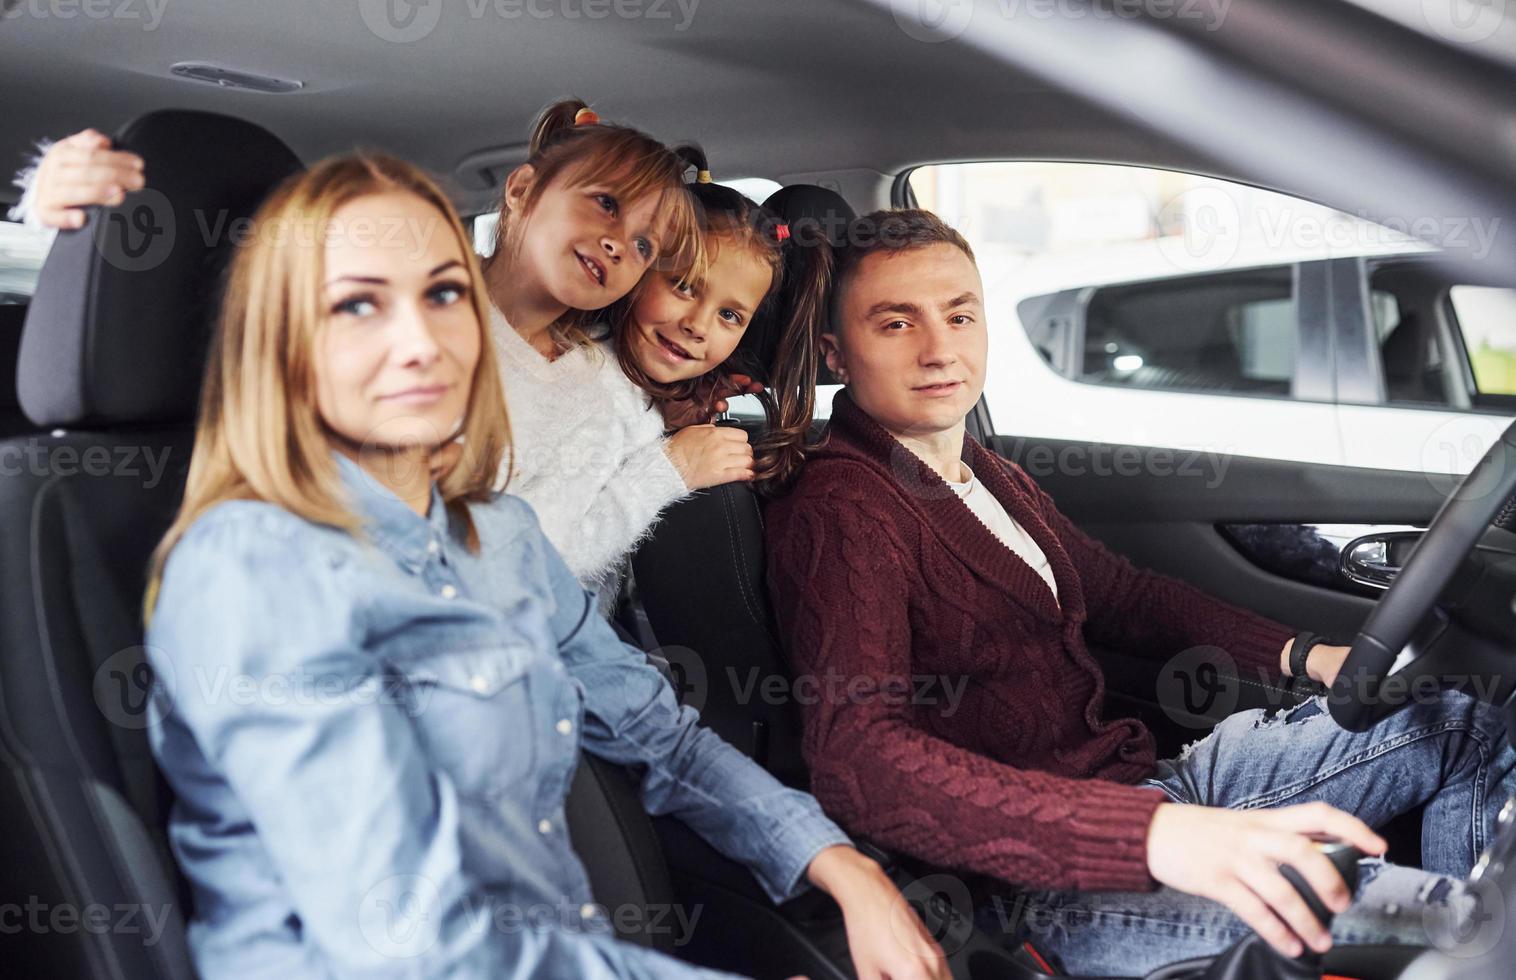 Cheerful family riding in a car together. Having fun and good weekend photo